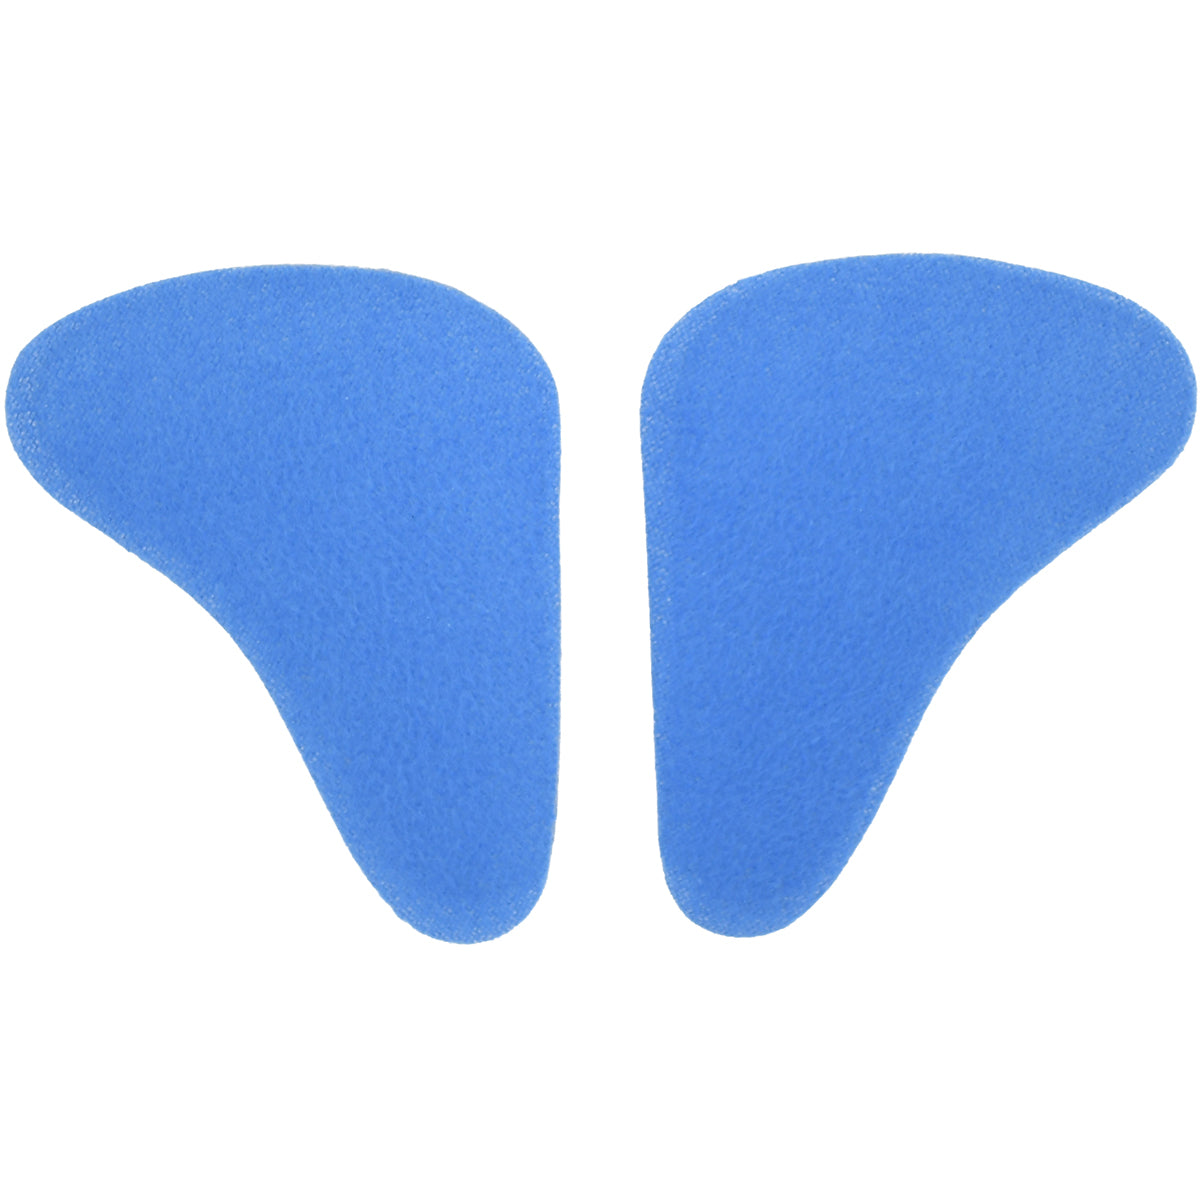 Soft Stride Pain Relief Metatarsal Pads Soft Stride